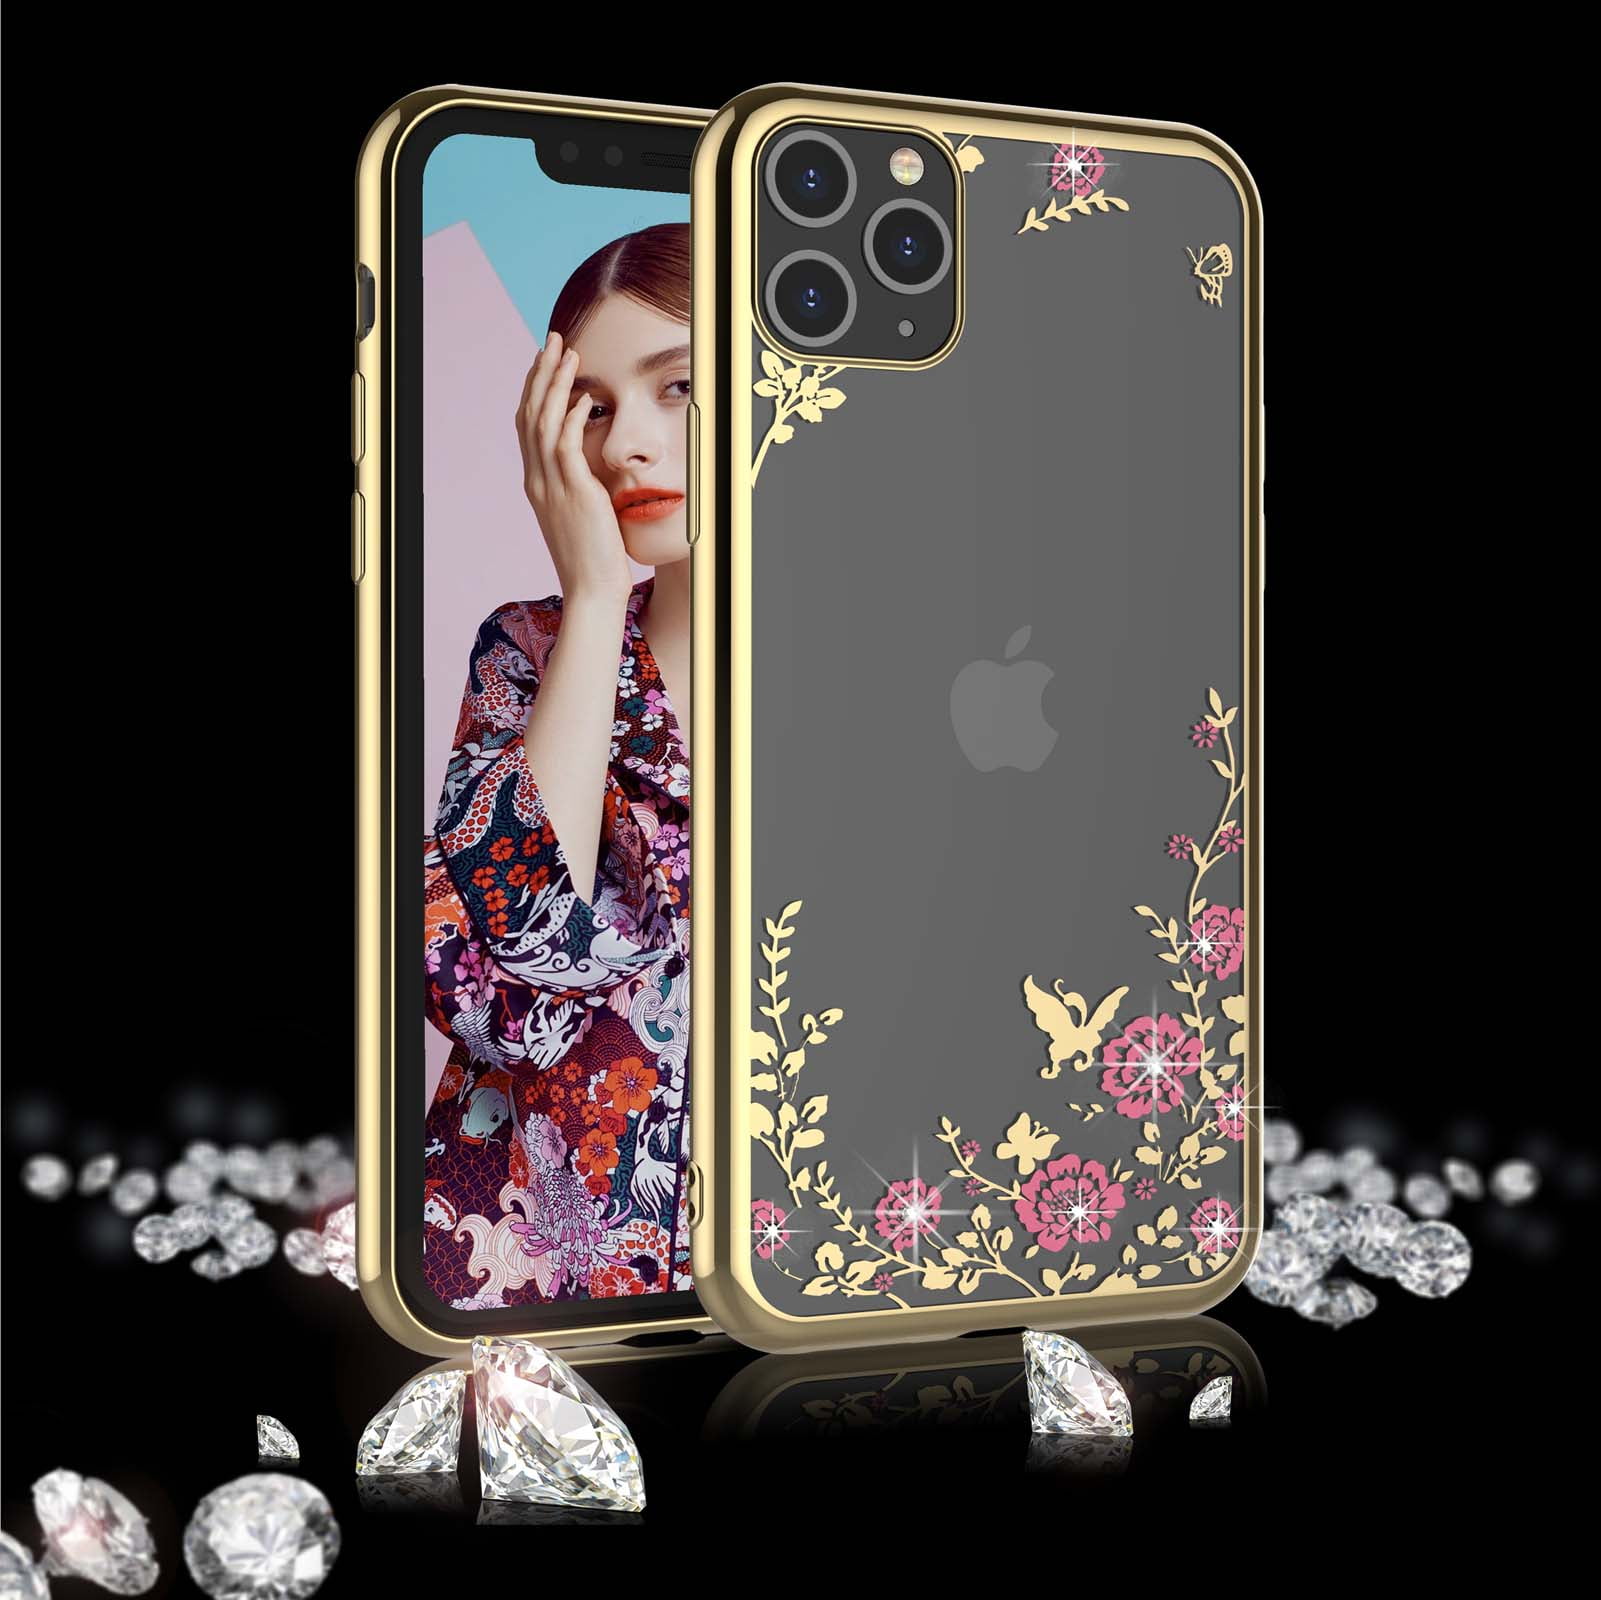 iPhone 11 Pro Max Case, Cute Case For 2019 iPhone 11 Pro Max, Njjex